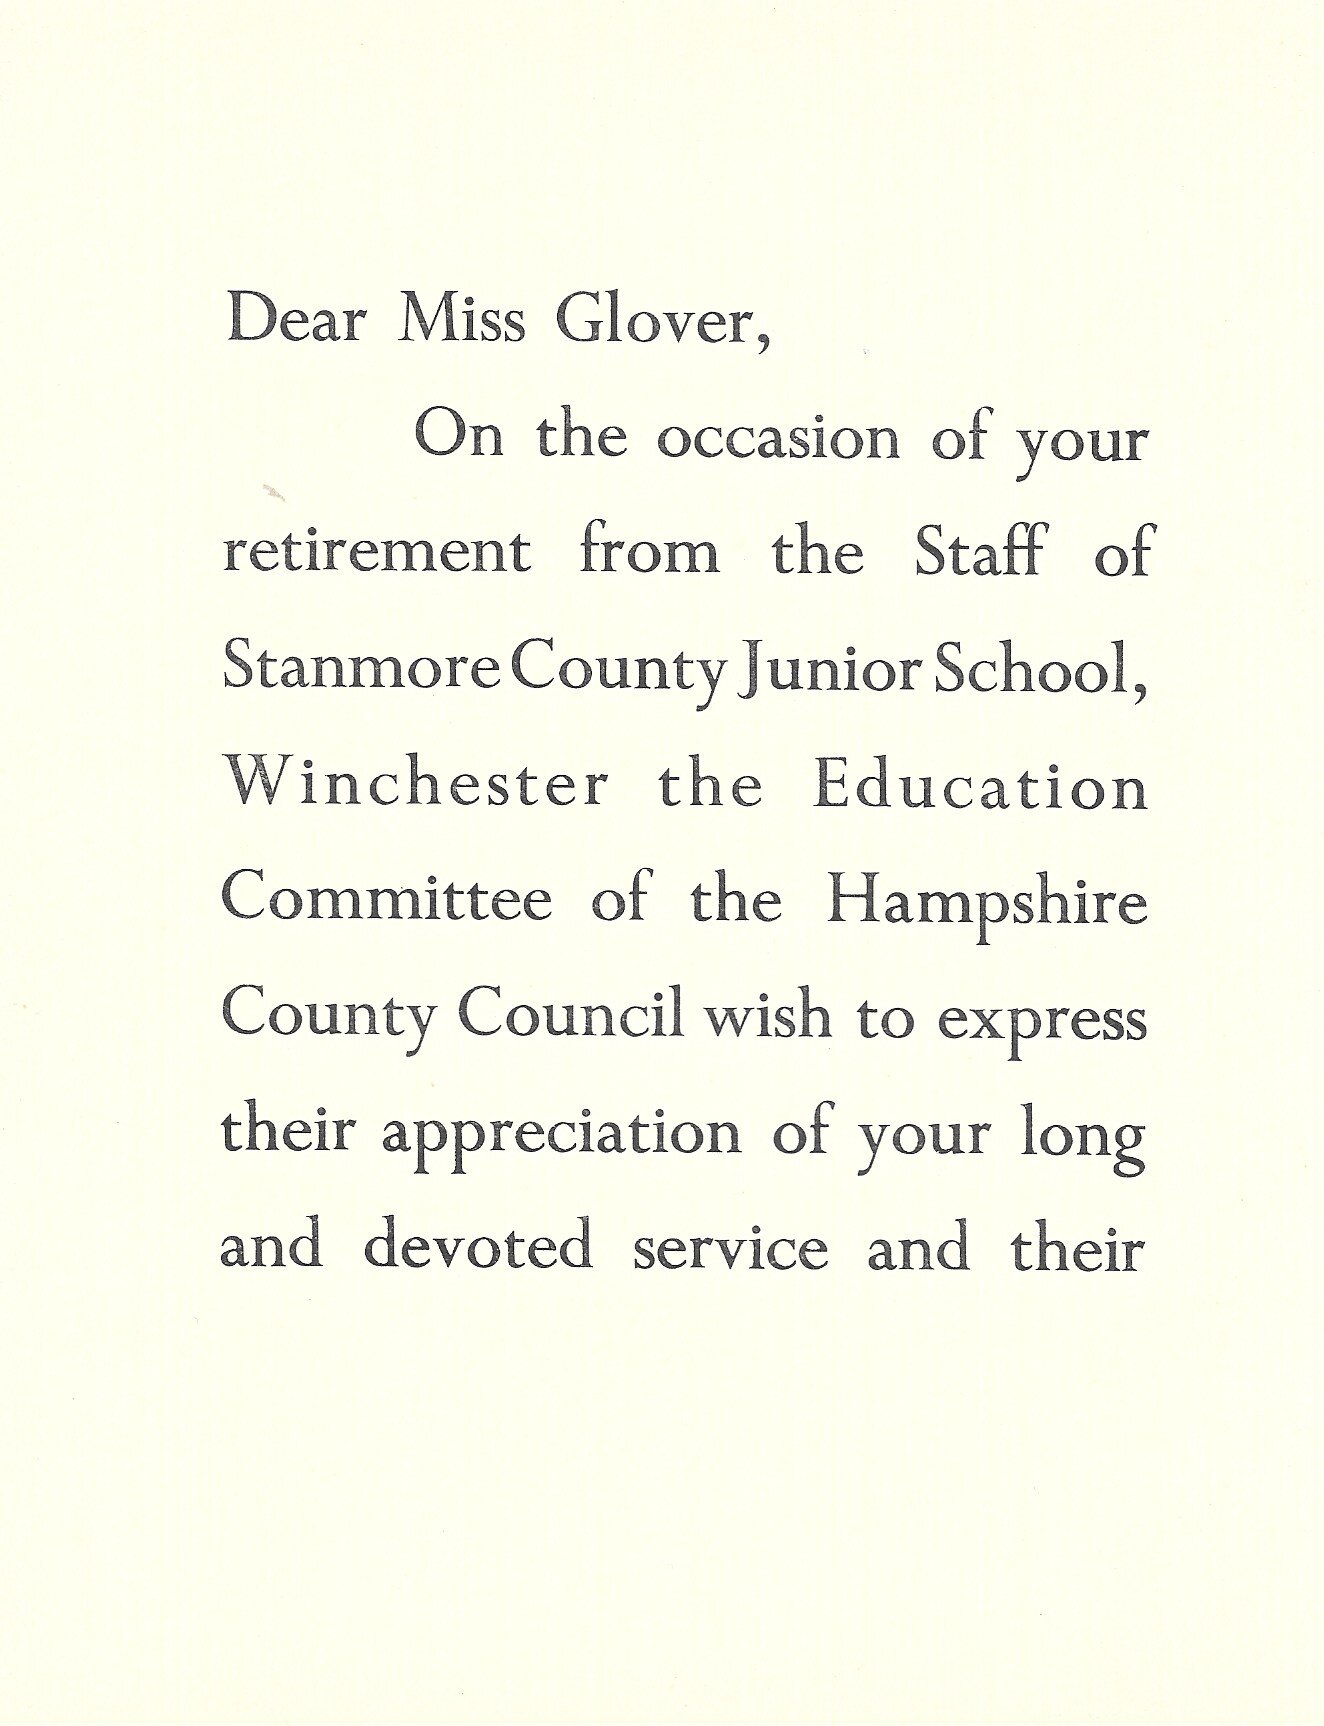  Miss Glover retirement card 2 of 3 